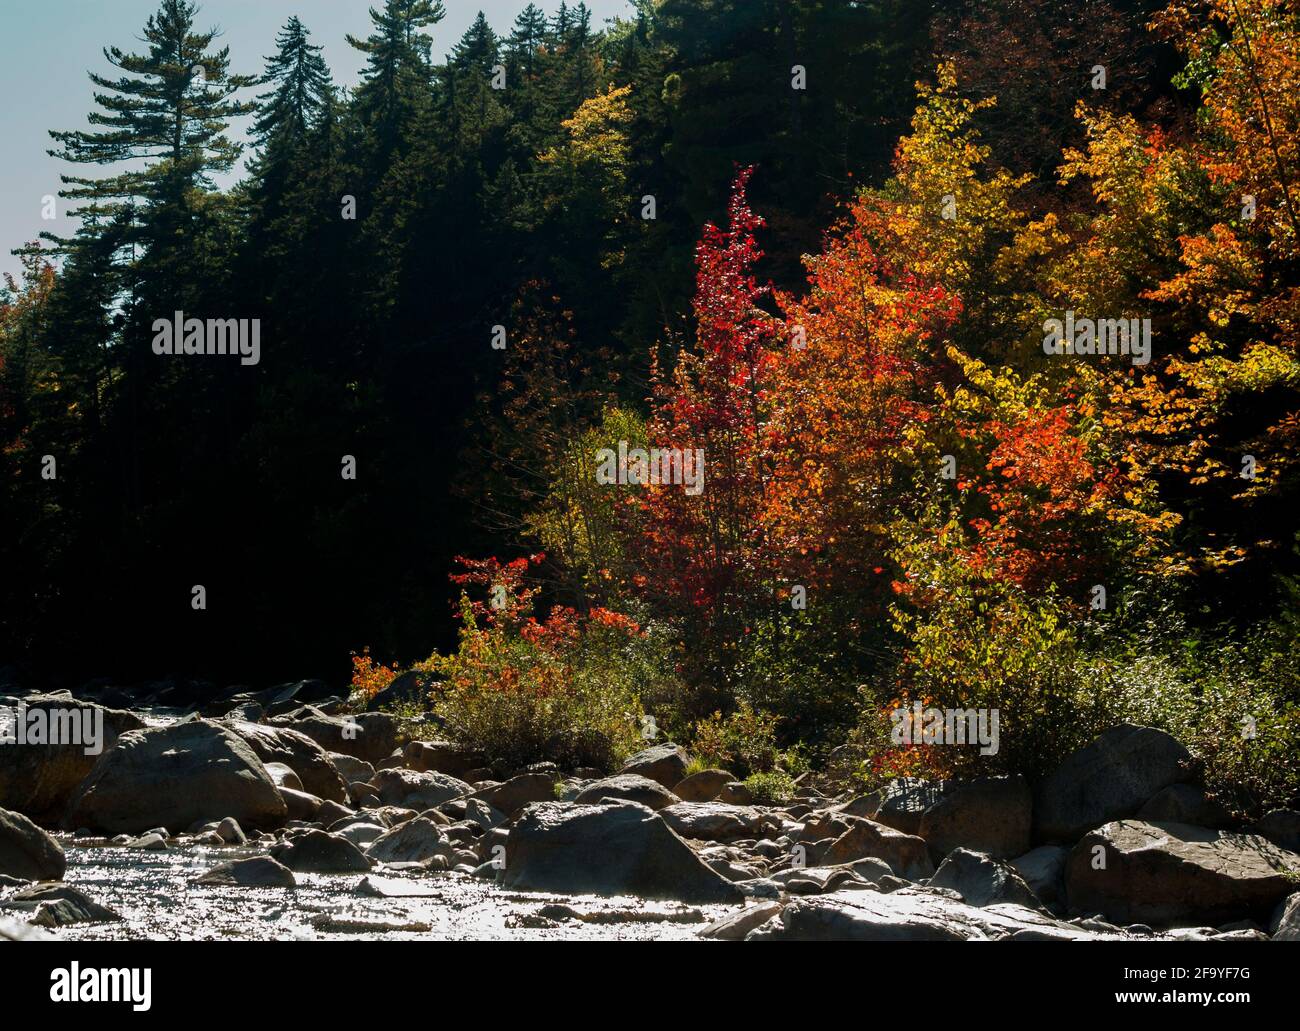 Bright red foliage on trees beside the rocky Pemigewasset River just off the Kancamagus Highway, New Hampshire, USA in autumn / fall. Stock Photo